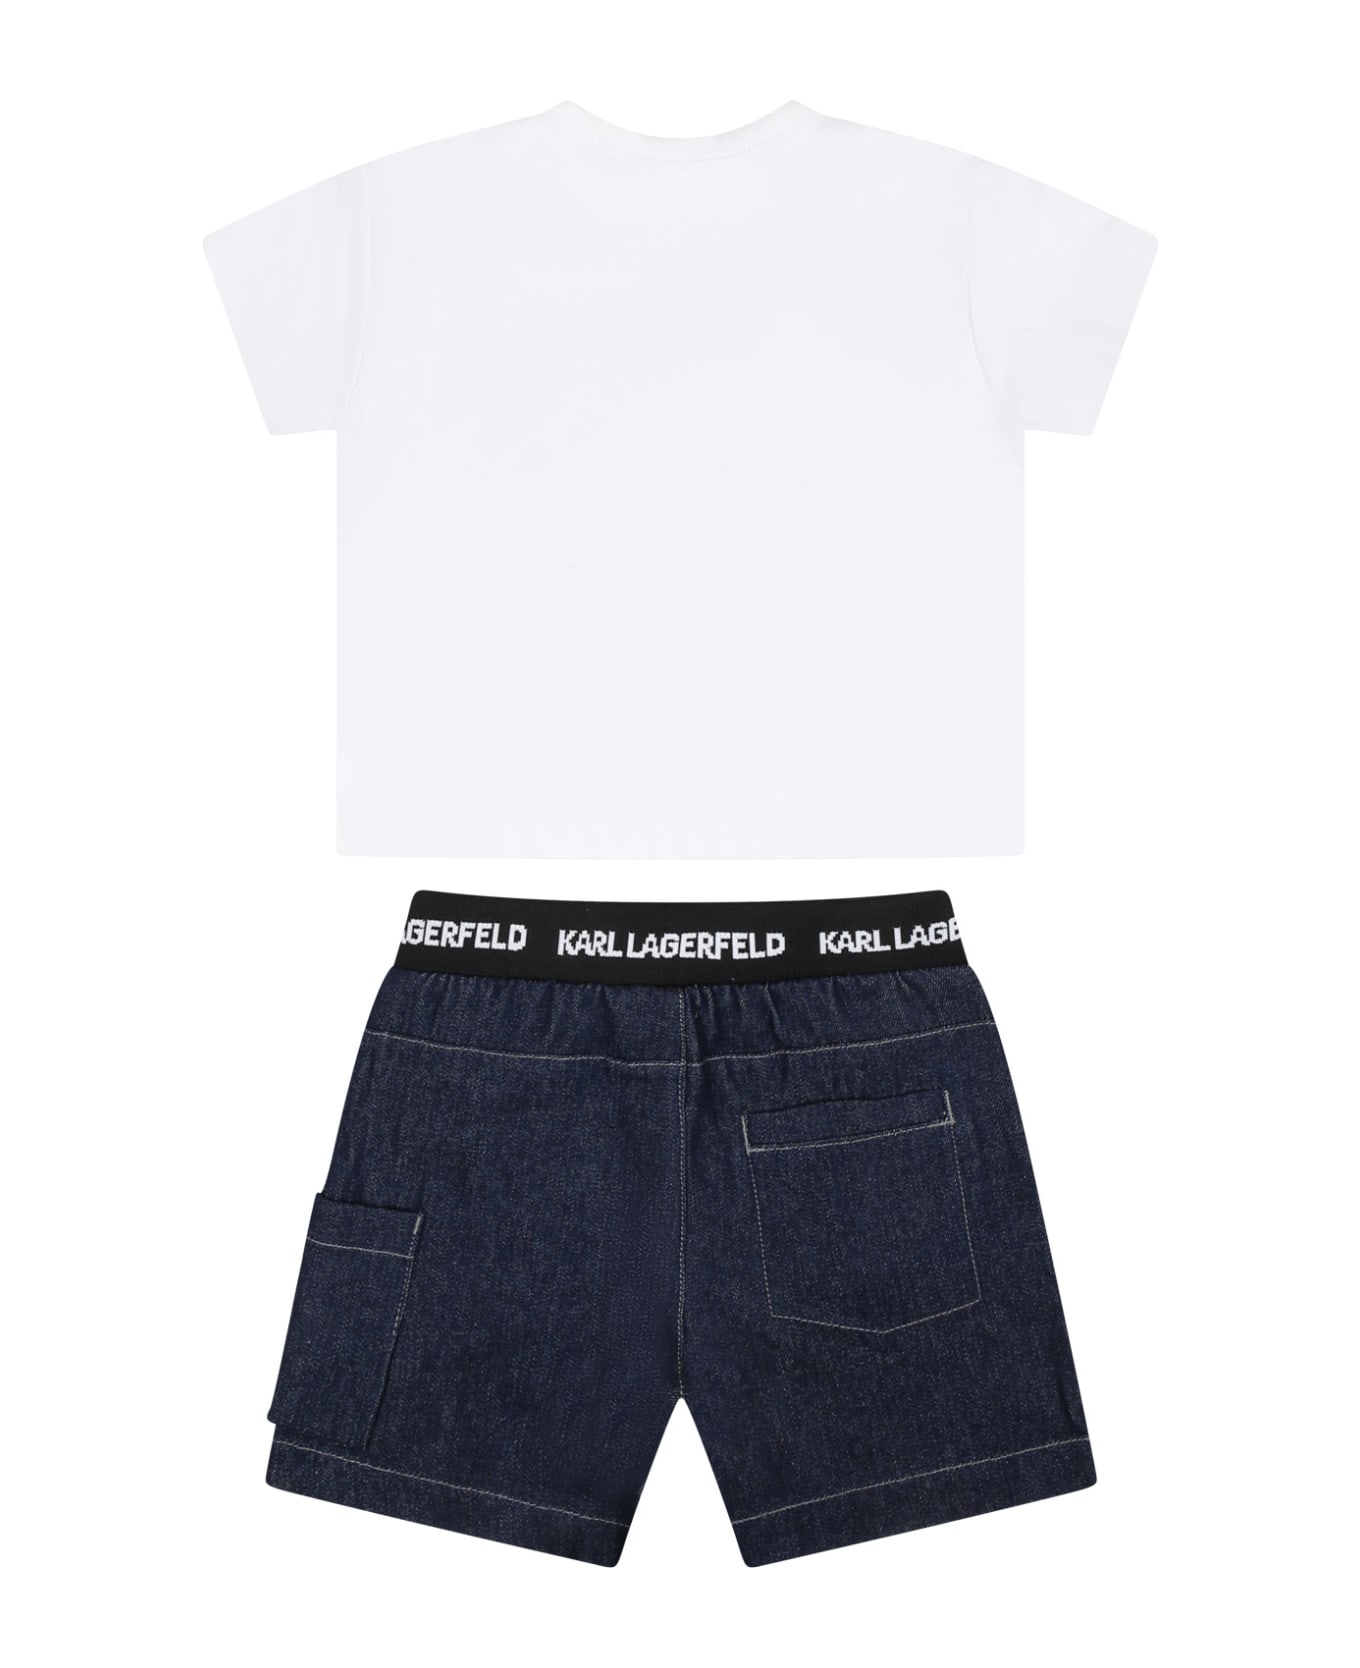 Karl Lagerfeld Kids Multicolor Set For Baby Boy With Logo - Multicolor